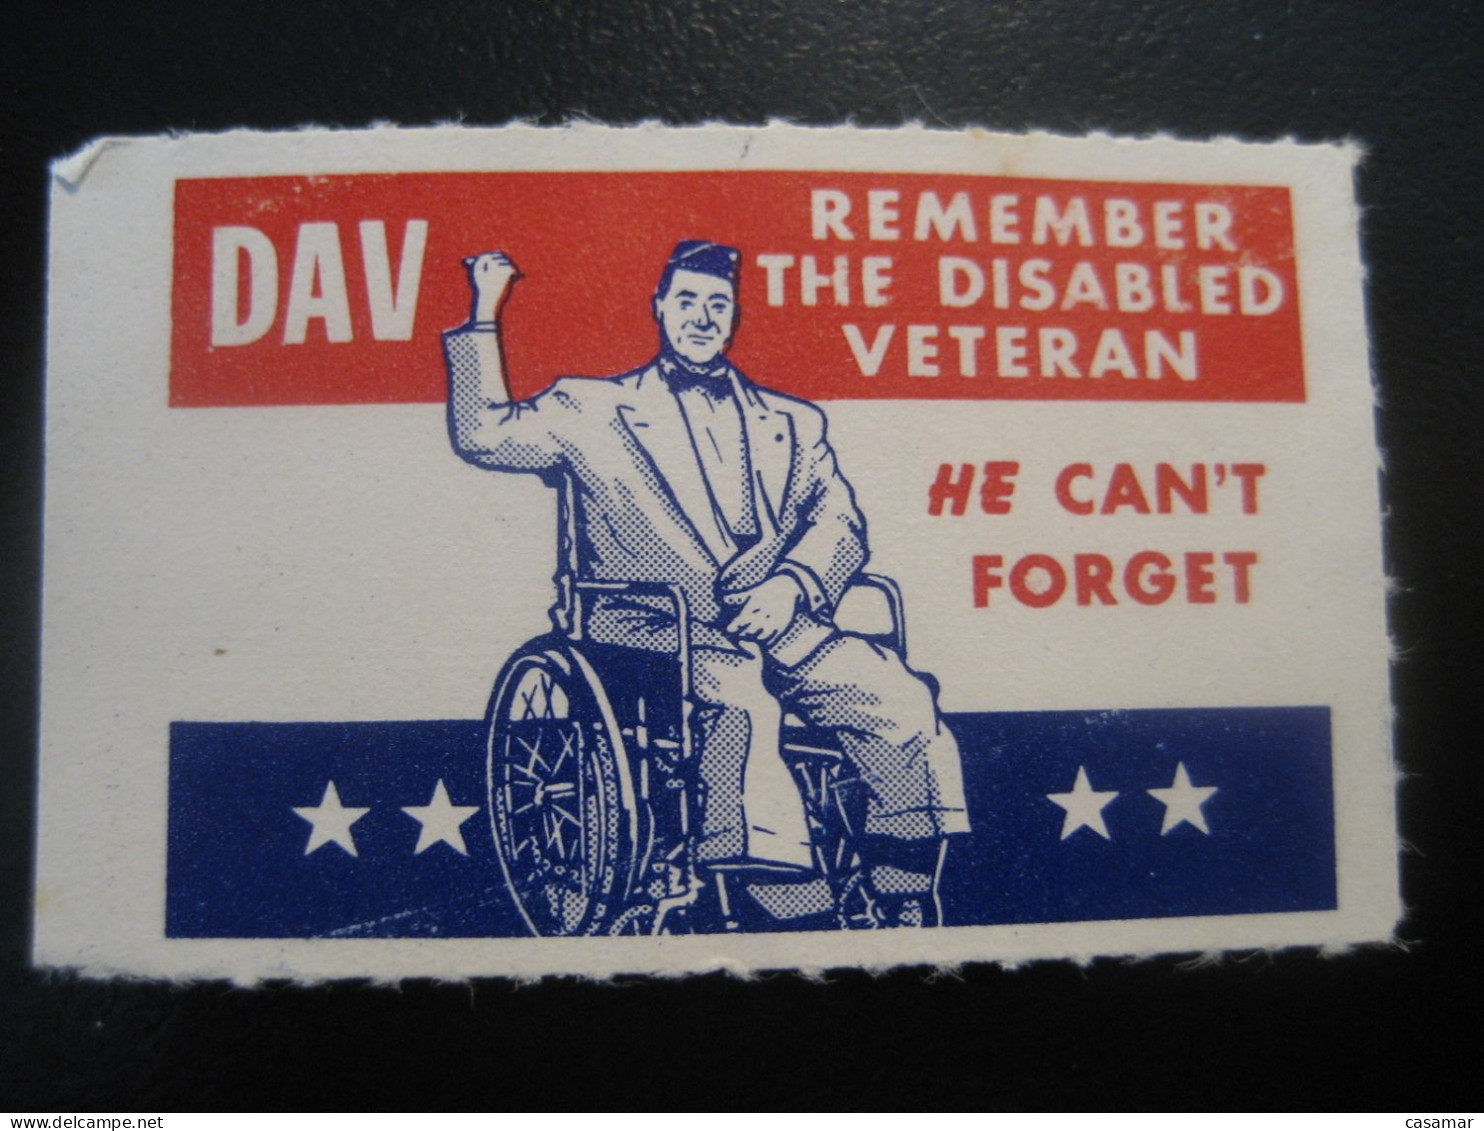 DAV Remember The Disabled Veteran Soldier WW2 WWII Health Sante Military War Poster Stamp Vignette USA Label - Guerre Mondiale (Seconde)